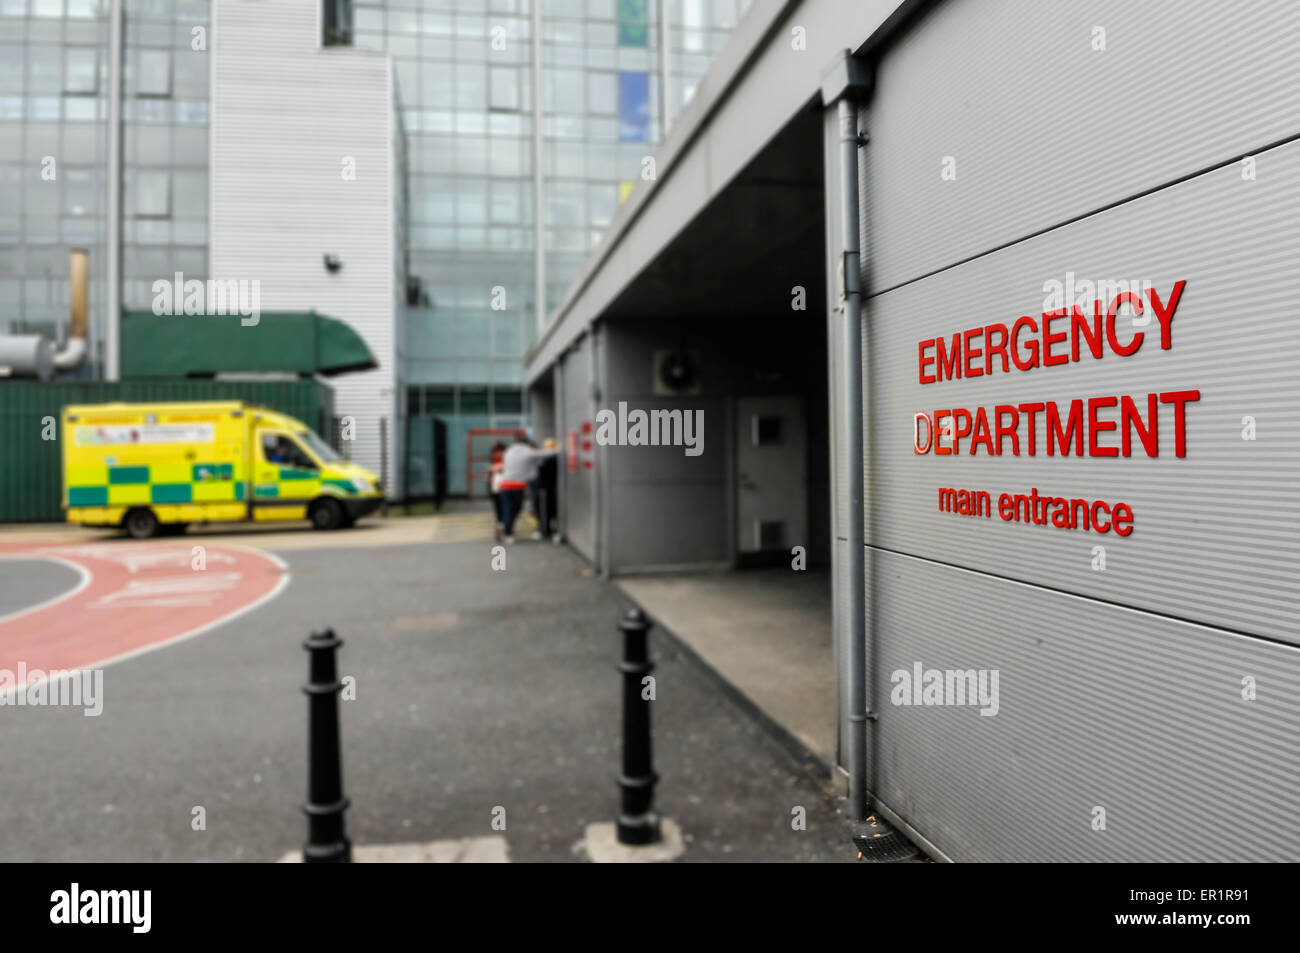 Ambulance outside a hospital Accident and Emergency department. Stock Photo